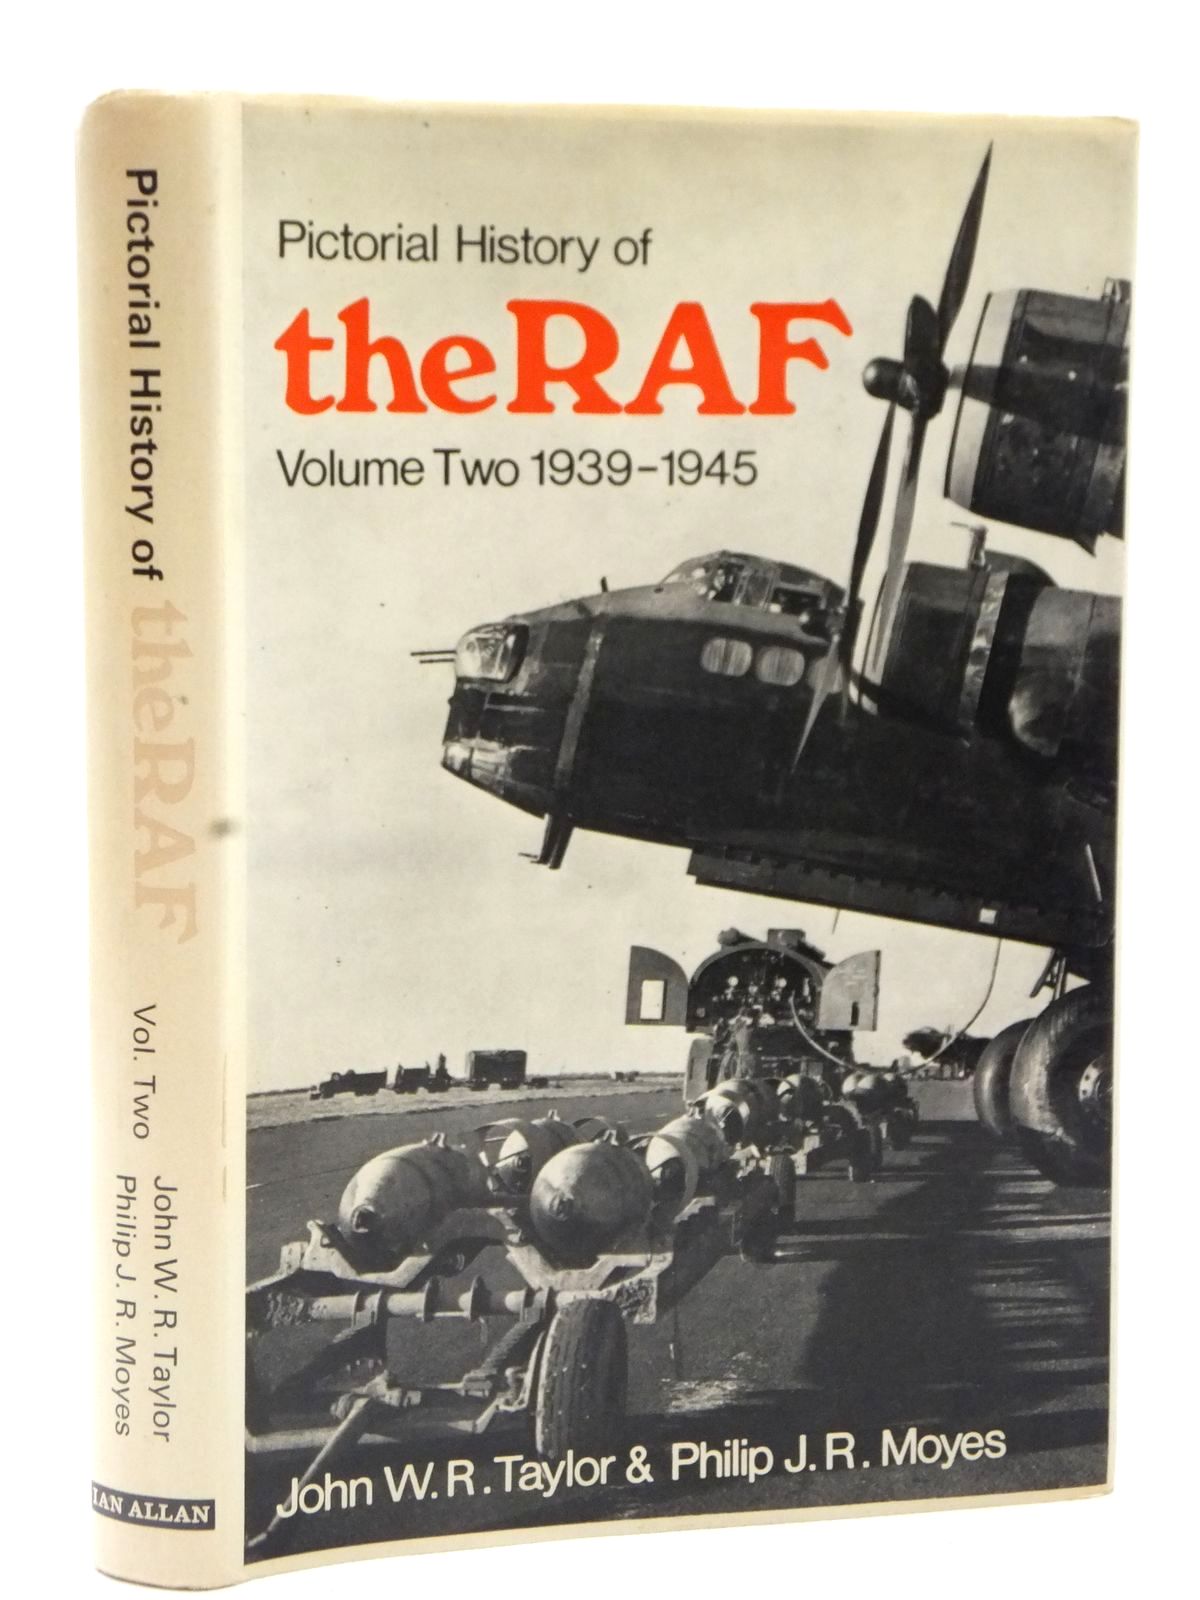 TAYLOR, JOHN W.R. & MOYES, PHILIP J.R. - Pictorial History of the Raf Volume Two 1939- 1945